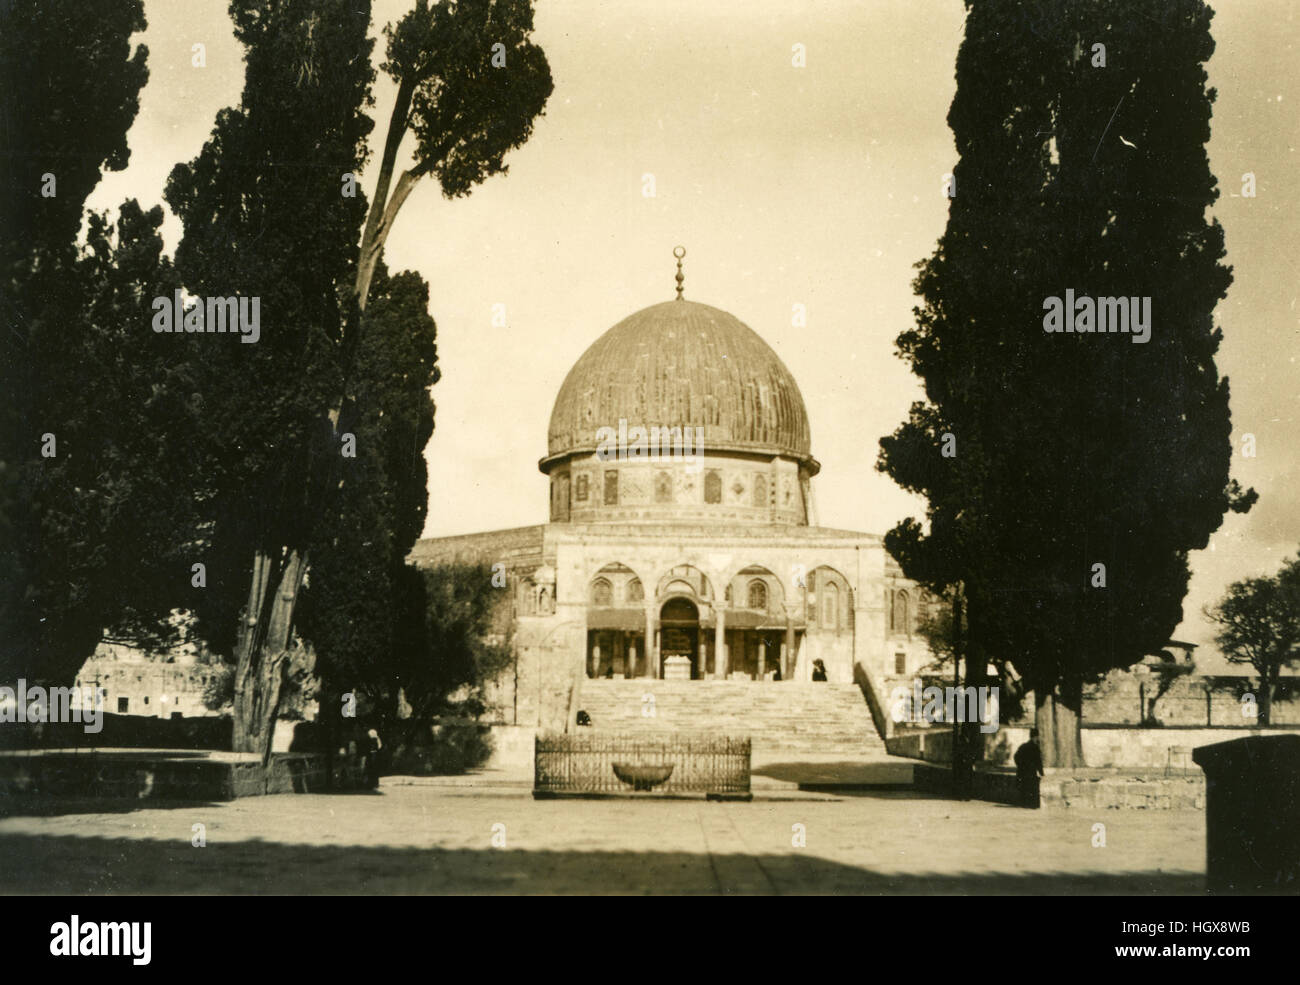 The Dome of the Rock  looking through the trees Jerusalem, Palestine, Israel, 1946, West Bank, Historical Images, Black and White, Great Image, Stock Photo